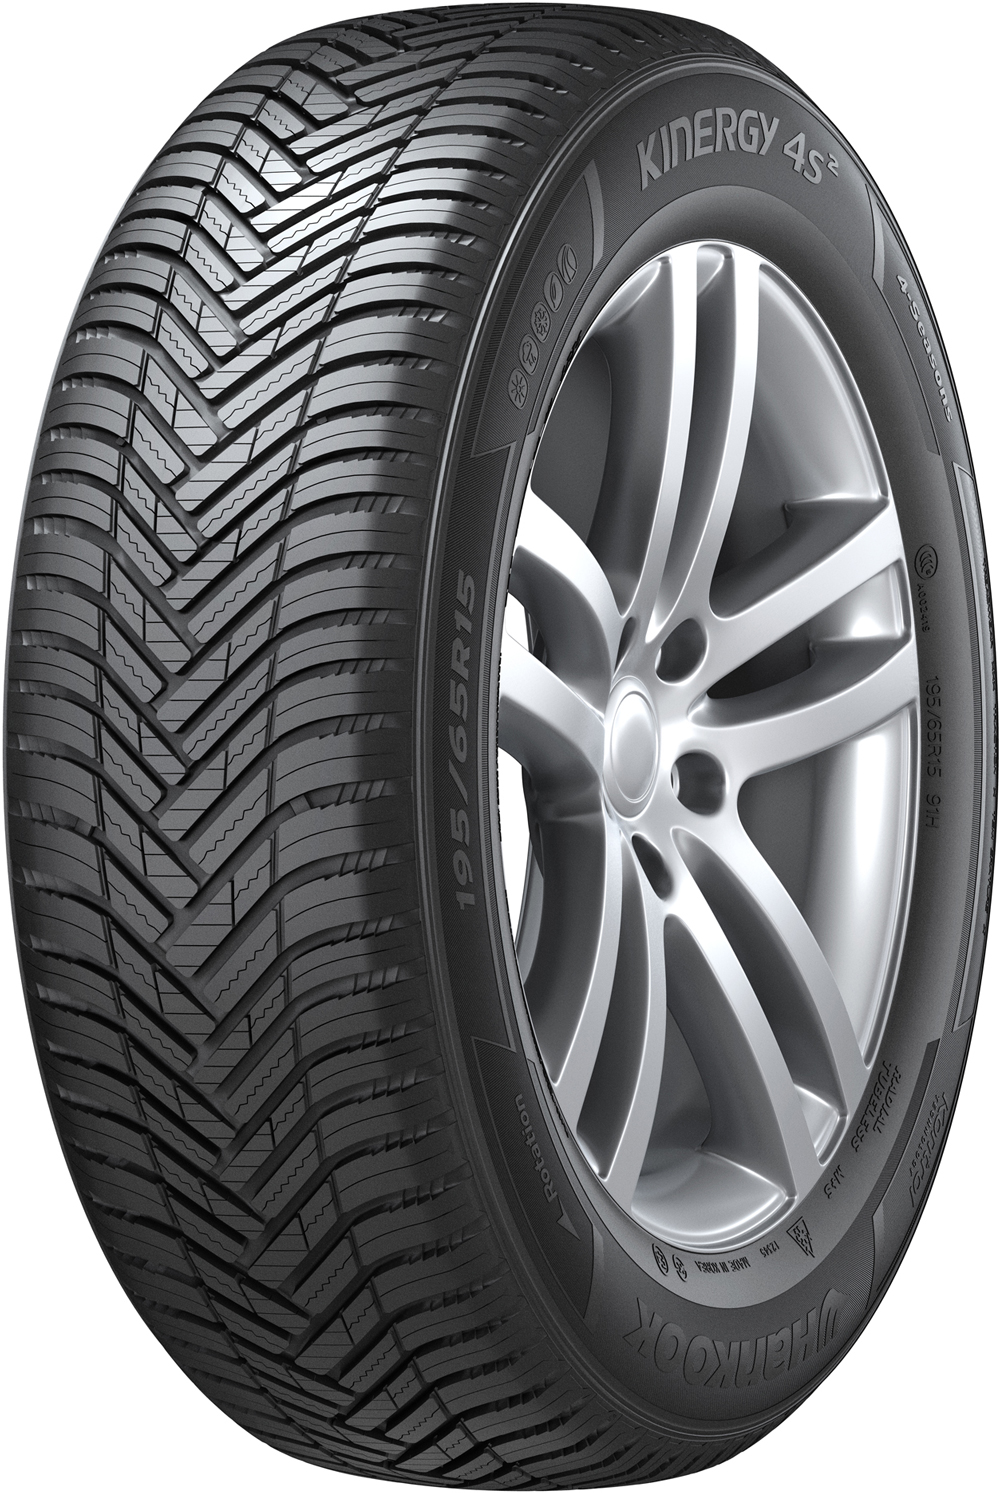 Anvelope auto HANKOOK H750B Kinergy 4S2 hrs XL RFT 205/55 R16 94W